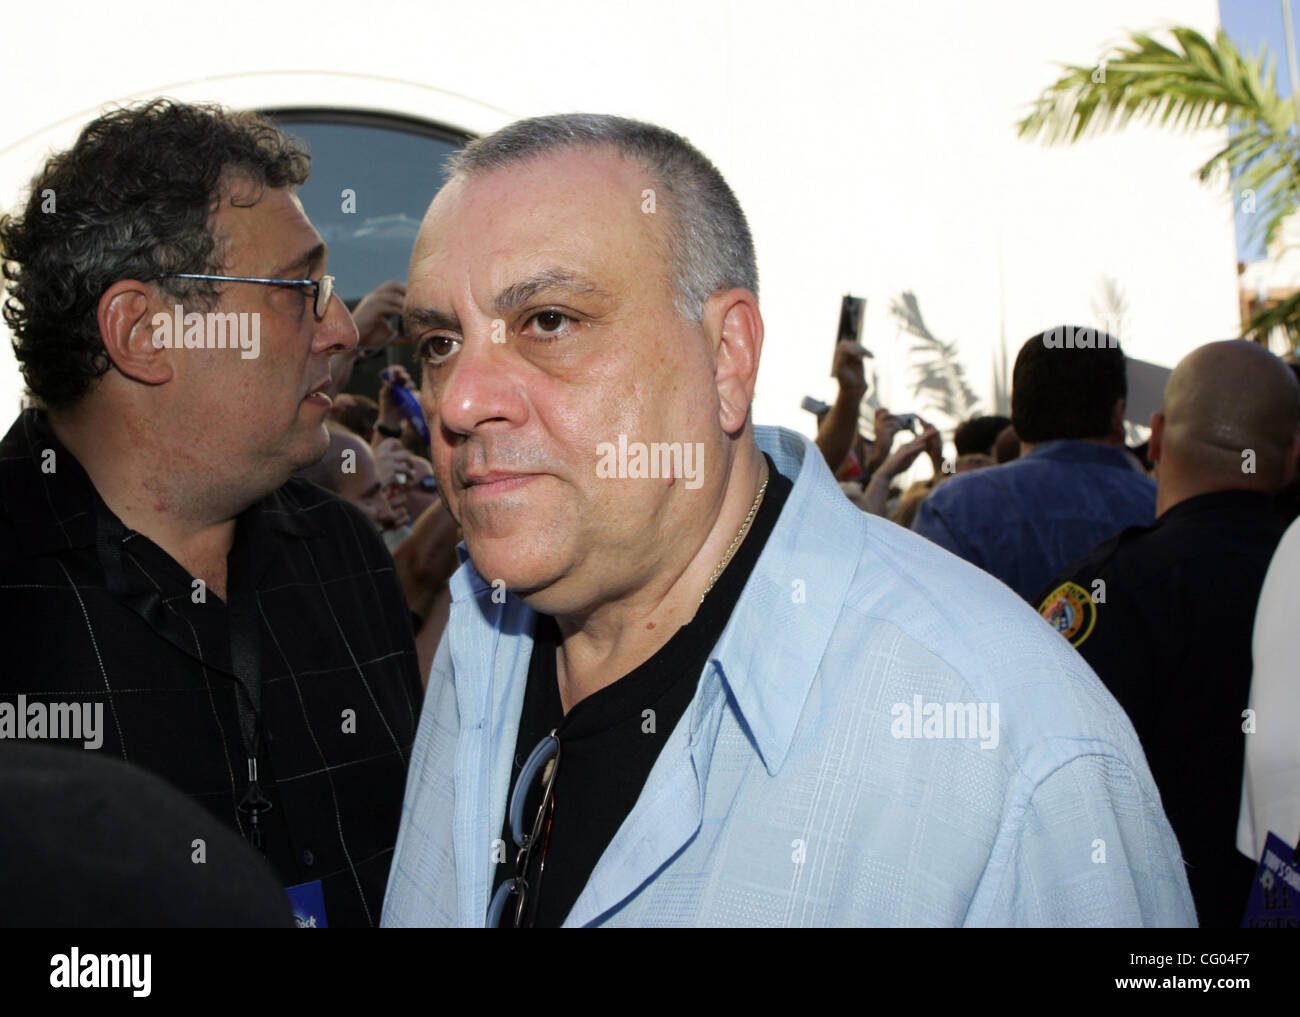 061007 met Sopranos Staff photo by Richard Graulich/The Palm Beach Post 0039098A HOLLYWOOD -  Sopranos actor Vince Curatola (Johnny 'Sack' Sacramoni) walks the red carpet at Tonys Swan Song party at Hard Rock Live at the Seminole Hard Rock Hotel and Casino in Hollywood, Fla., Sunday, June 10, 2007. Stock Photo